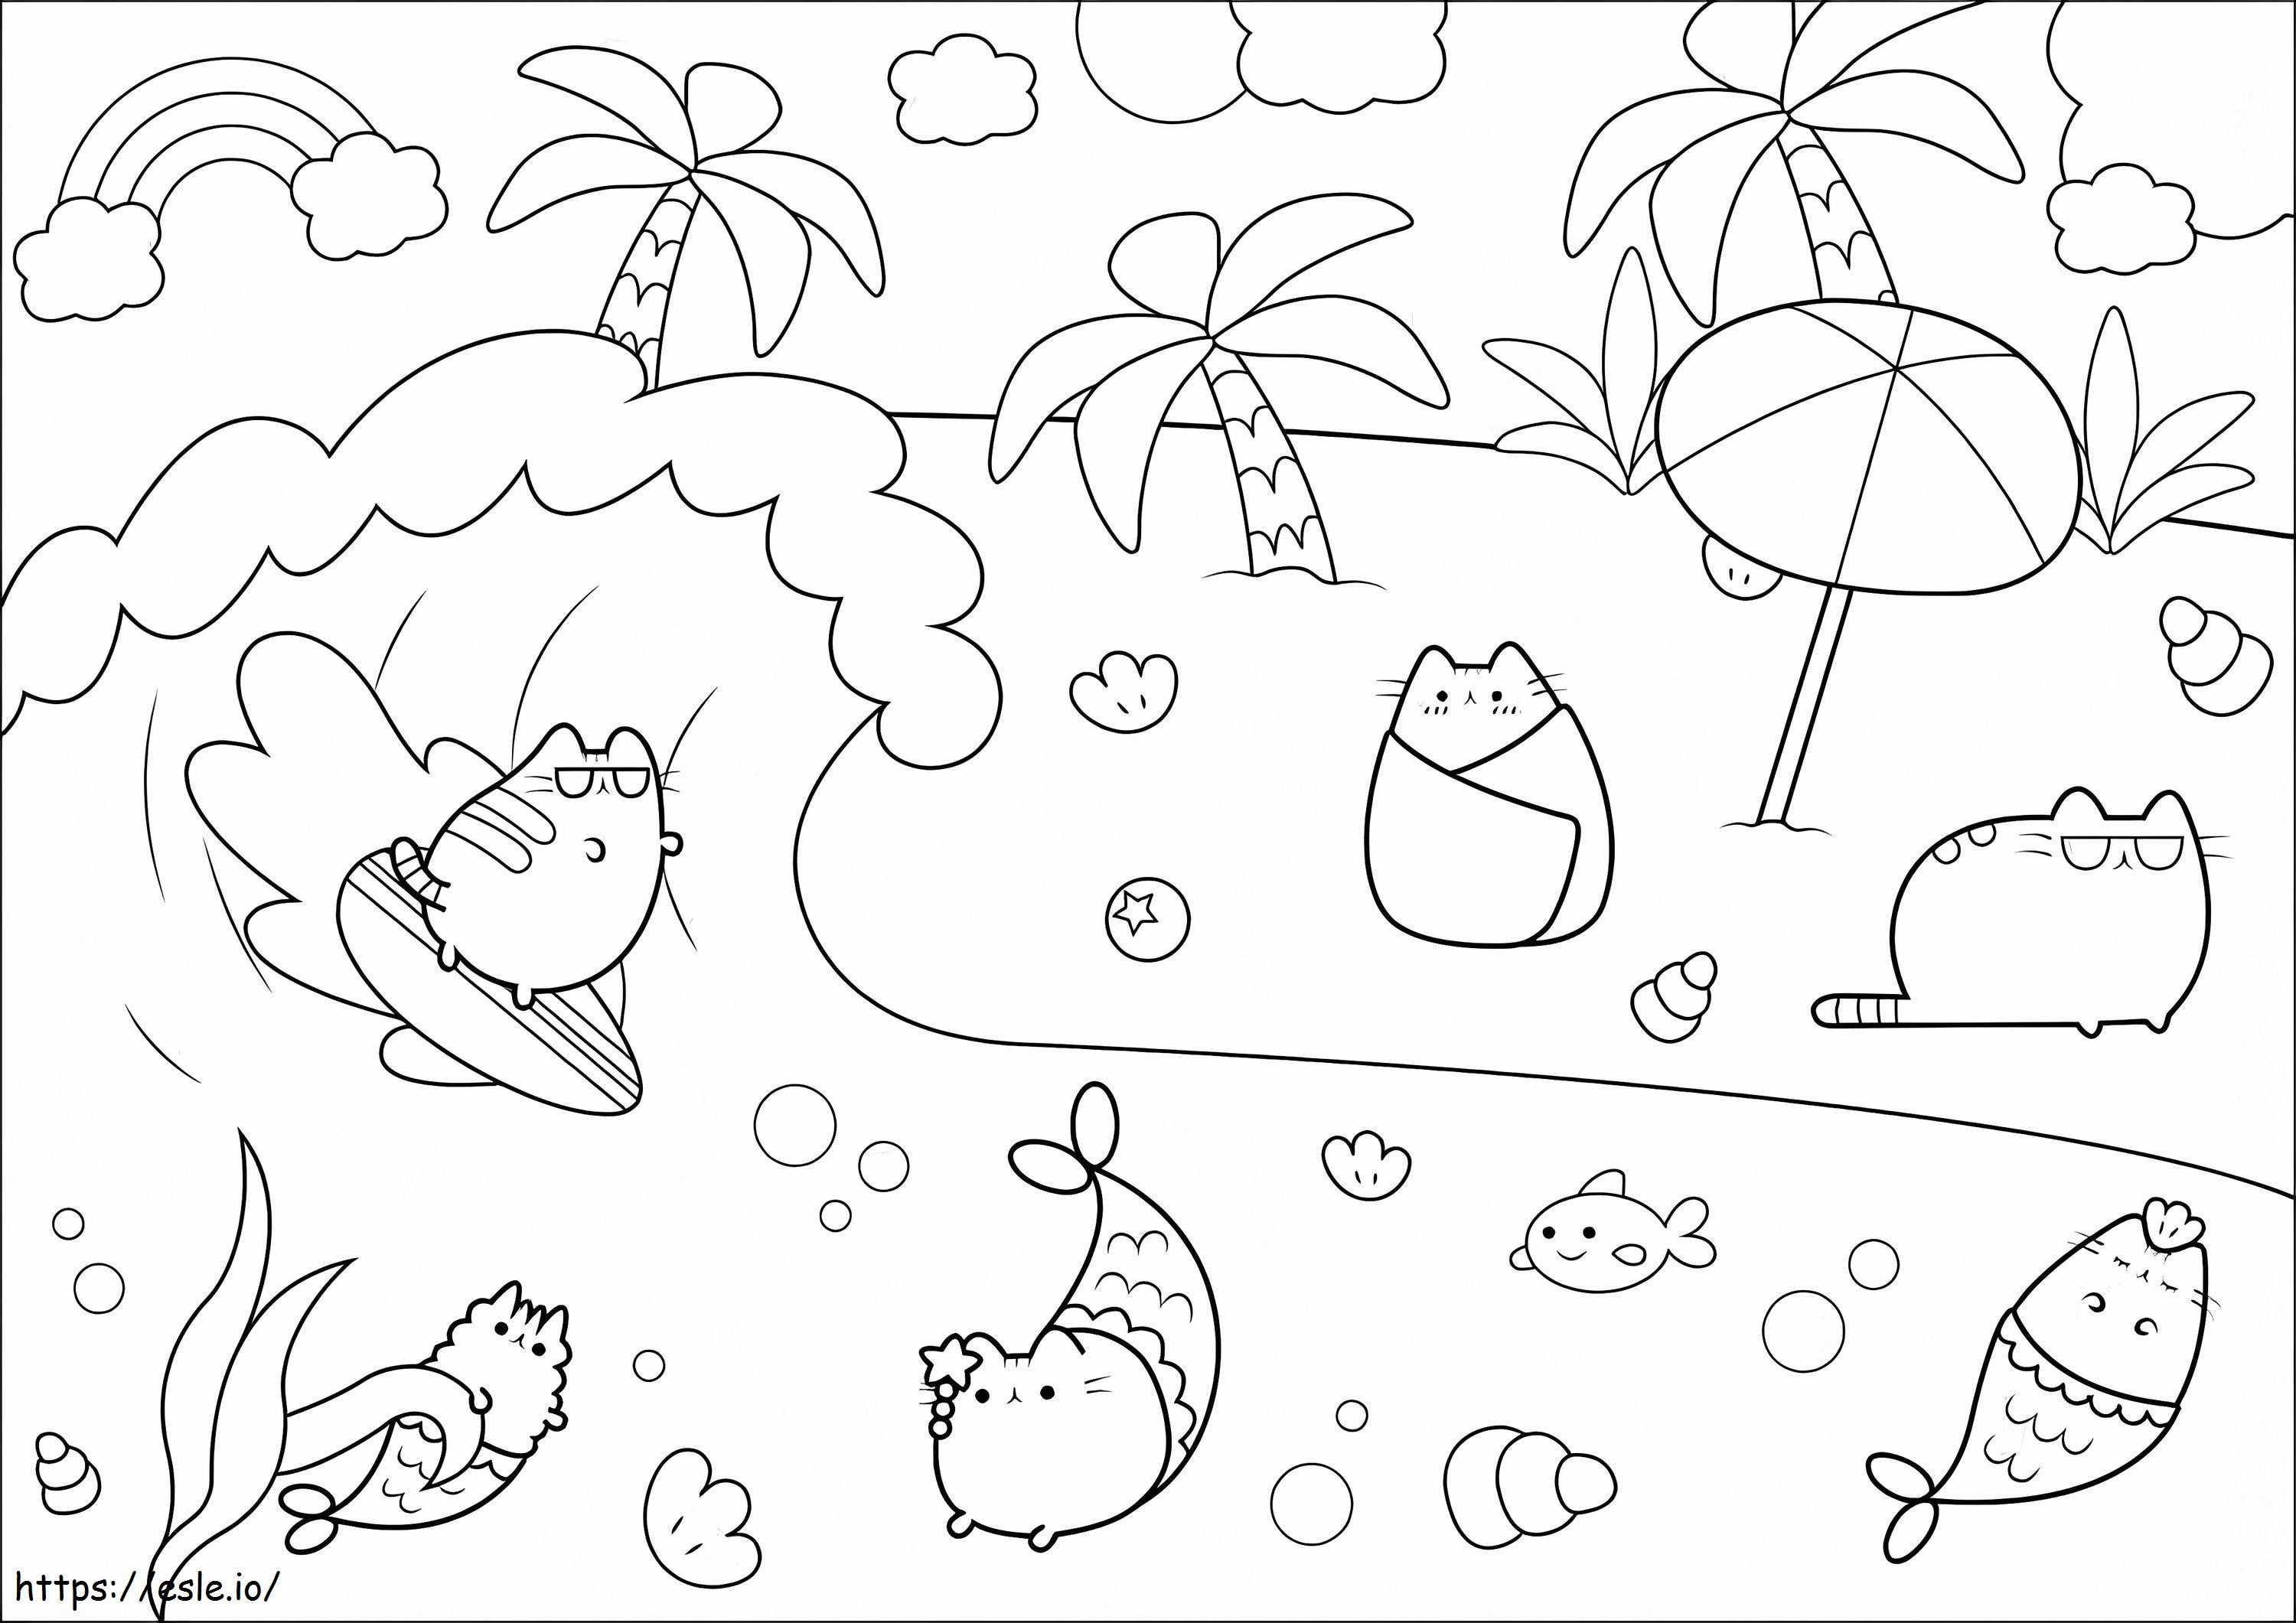 Pushen On The Beach coloring page